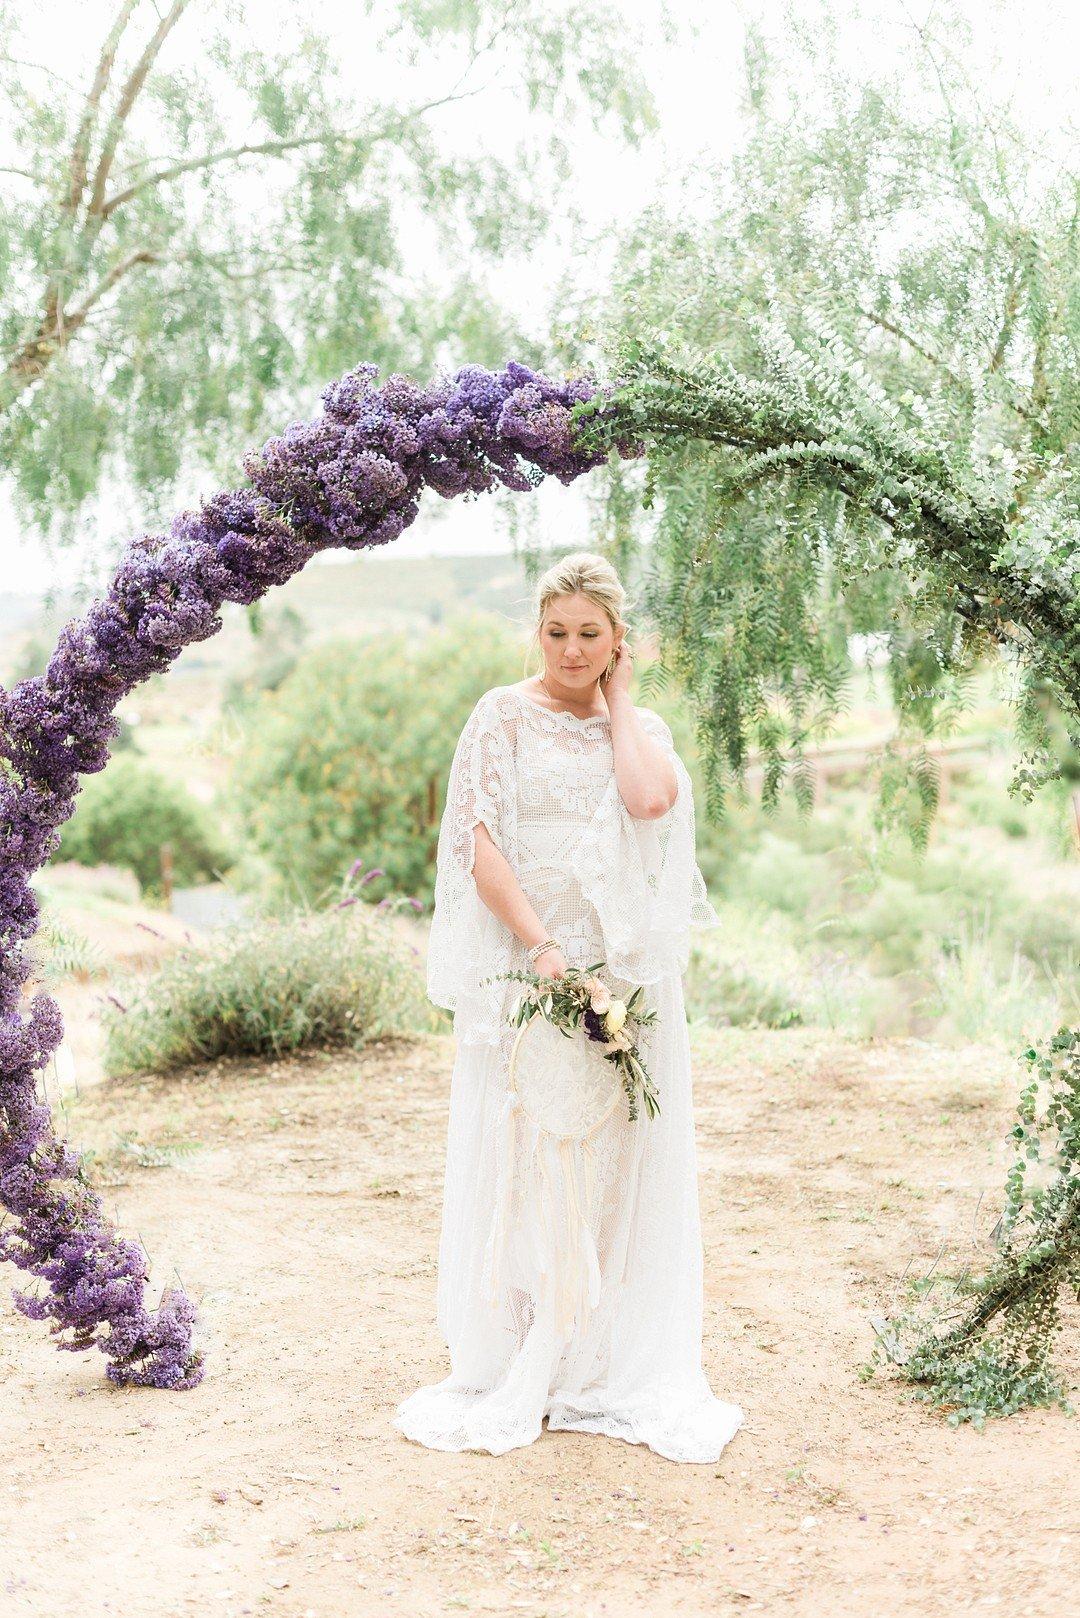 Top 5 Awesome Shades of Purple Wedding Color Combos